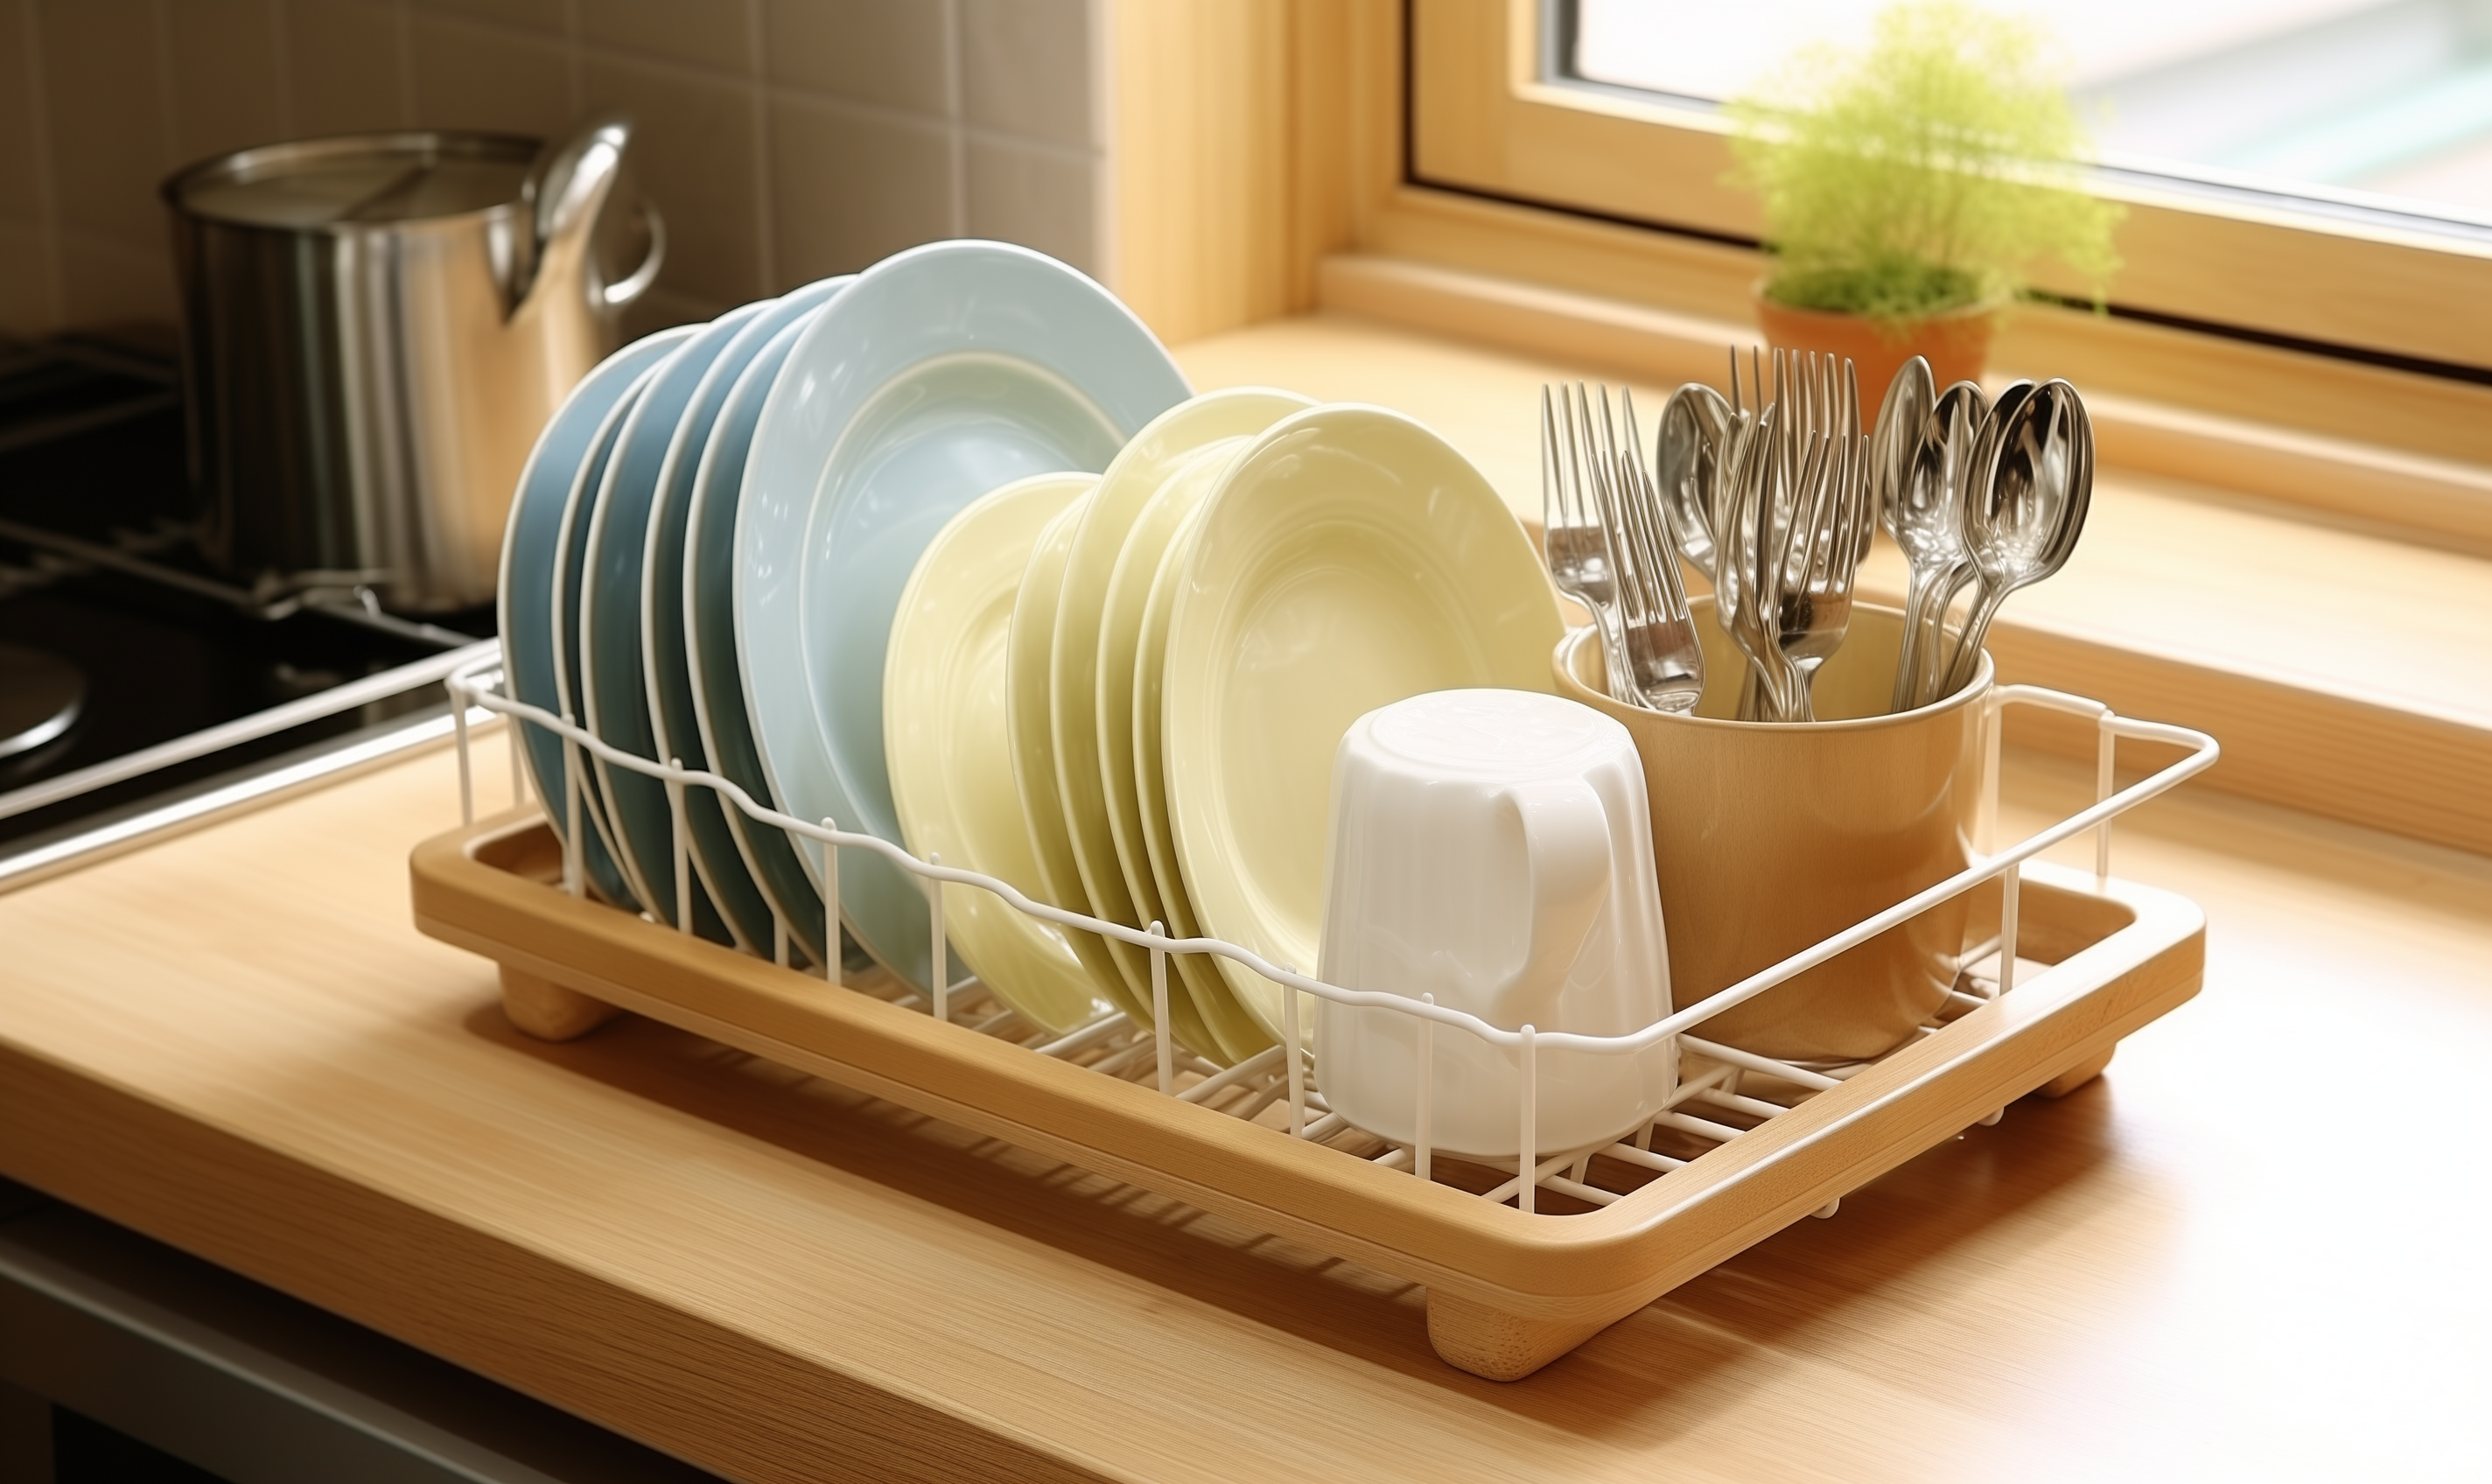 What Are the Best Dish Drying Racks